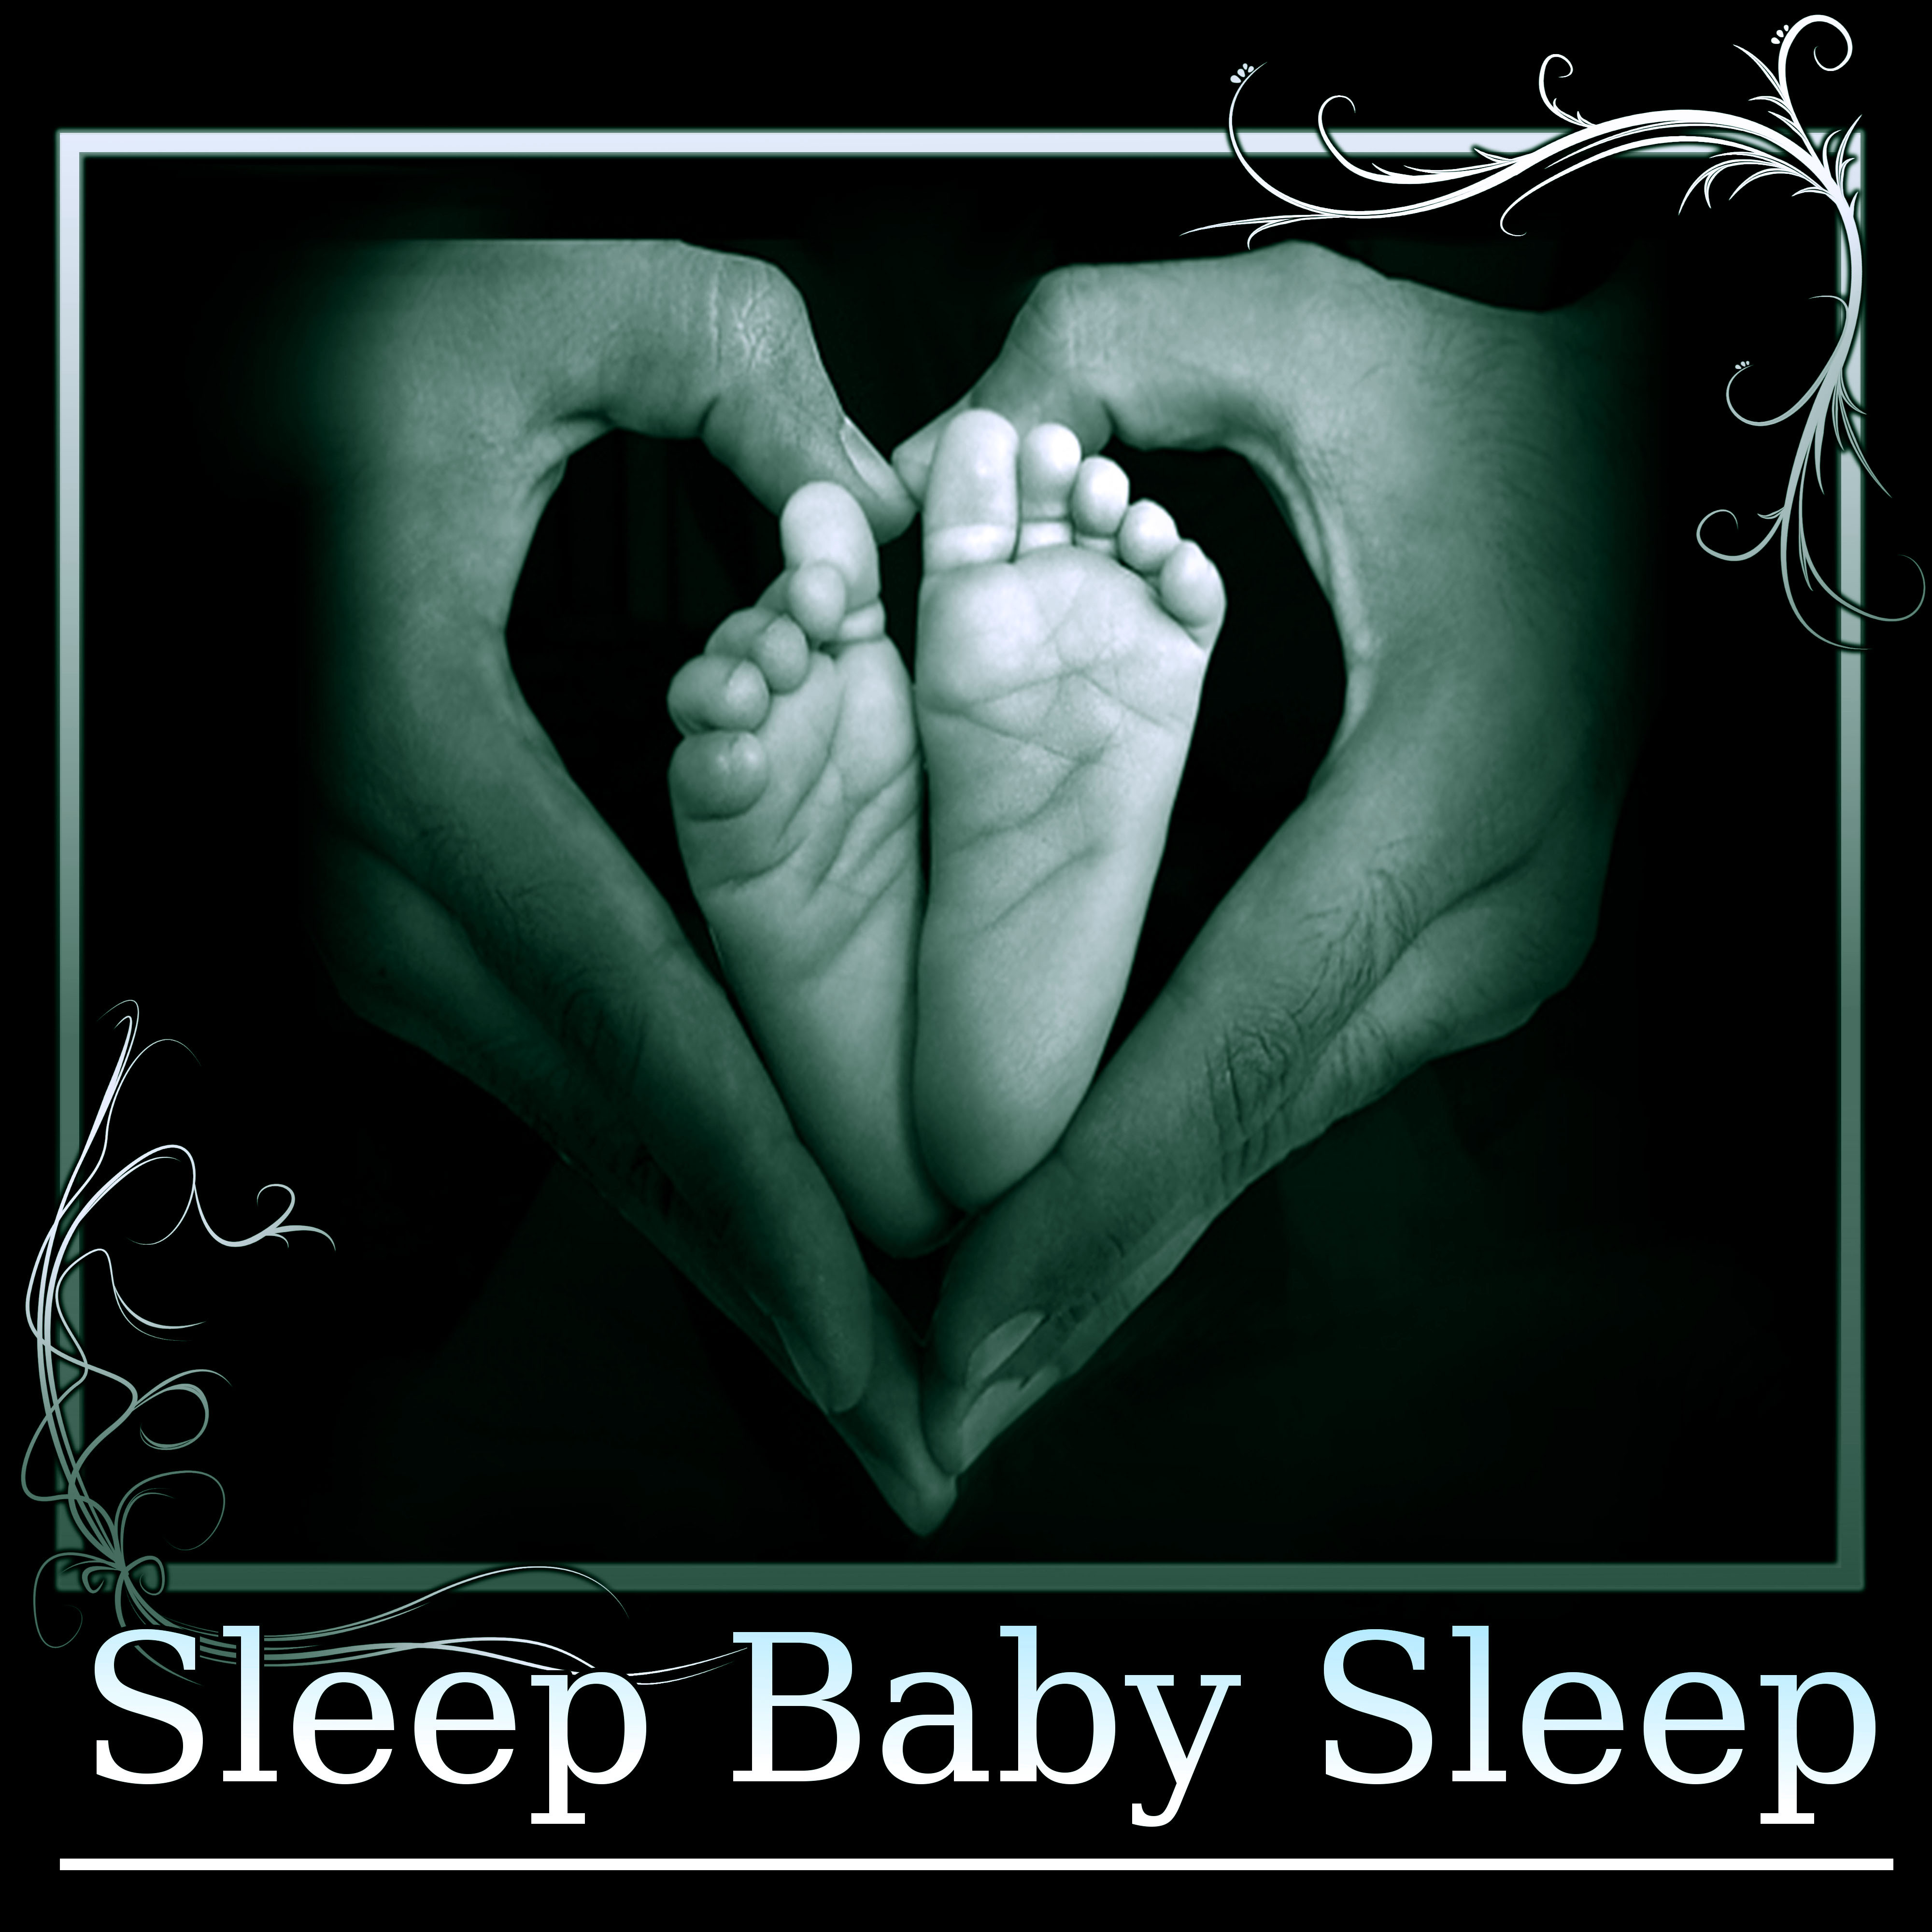 Sleep Baby Sleep – Help Your Baby Sleep Through the Night, Relaxing Nature Sounds Lullabies, Soothing Ocean Waves to Relax, White Noise for Deep Sleep for Toddlers